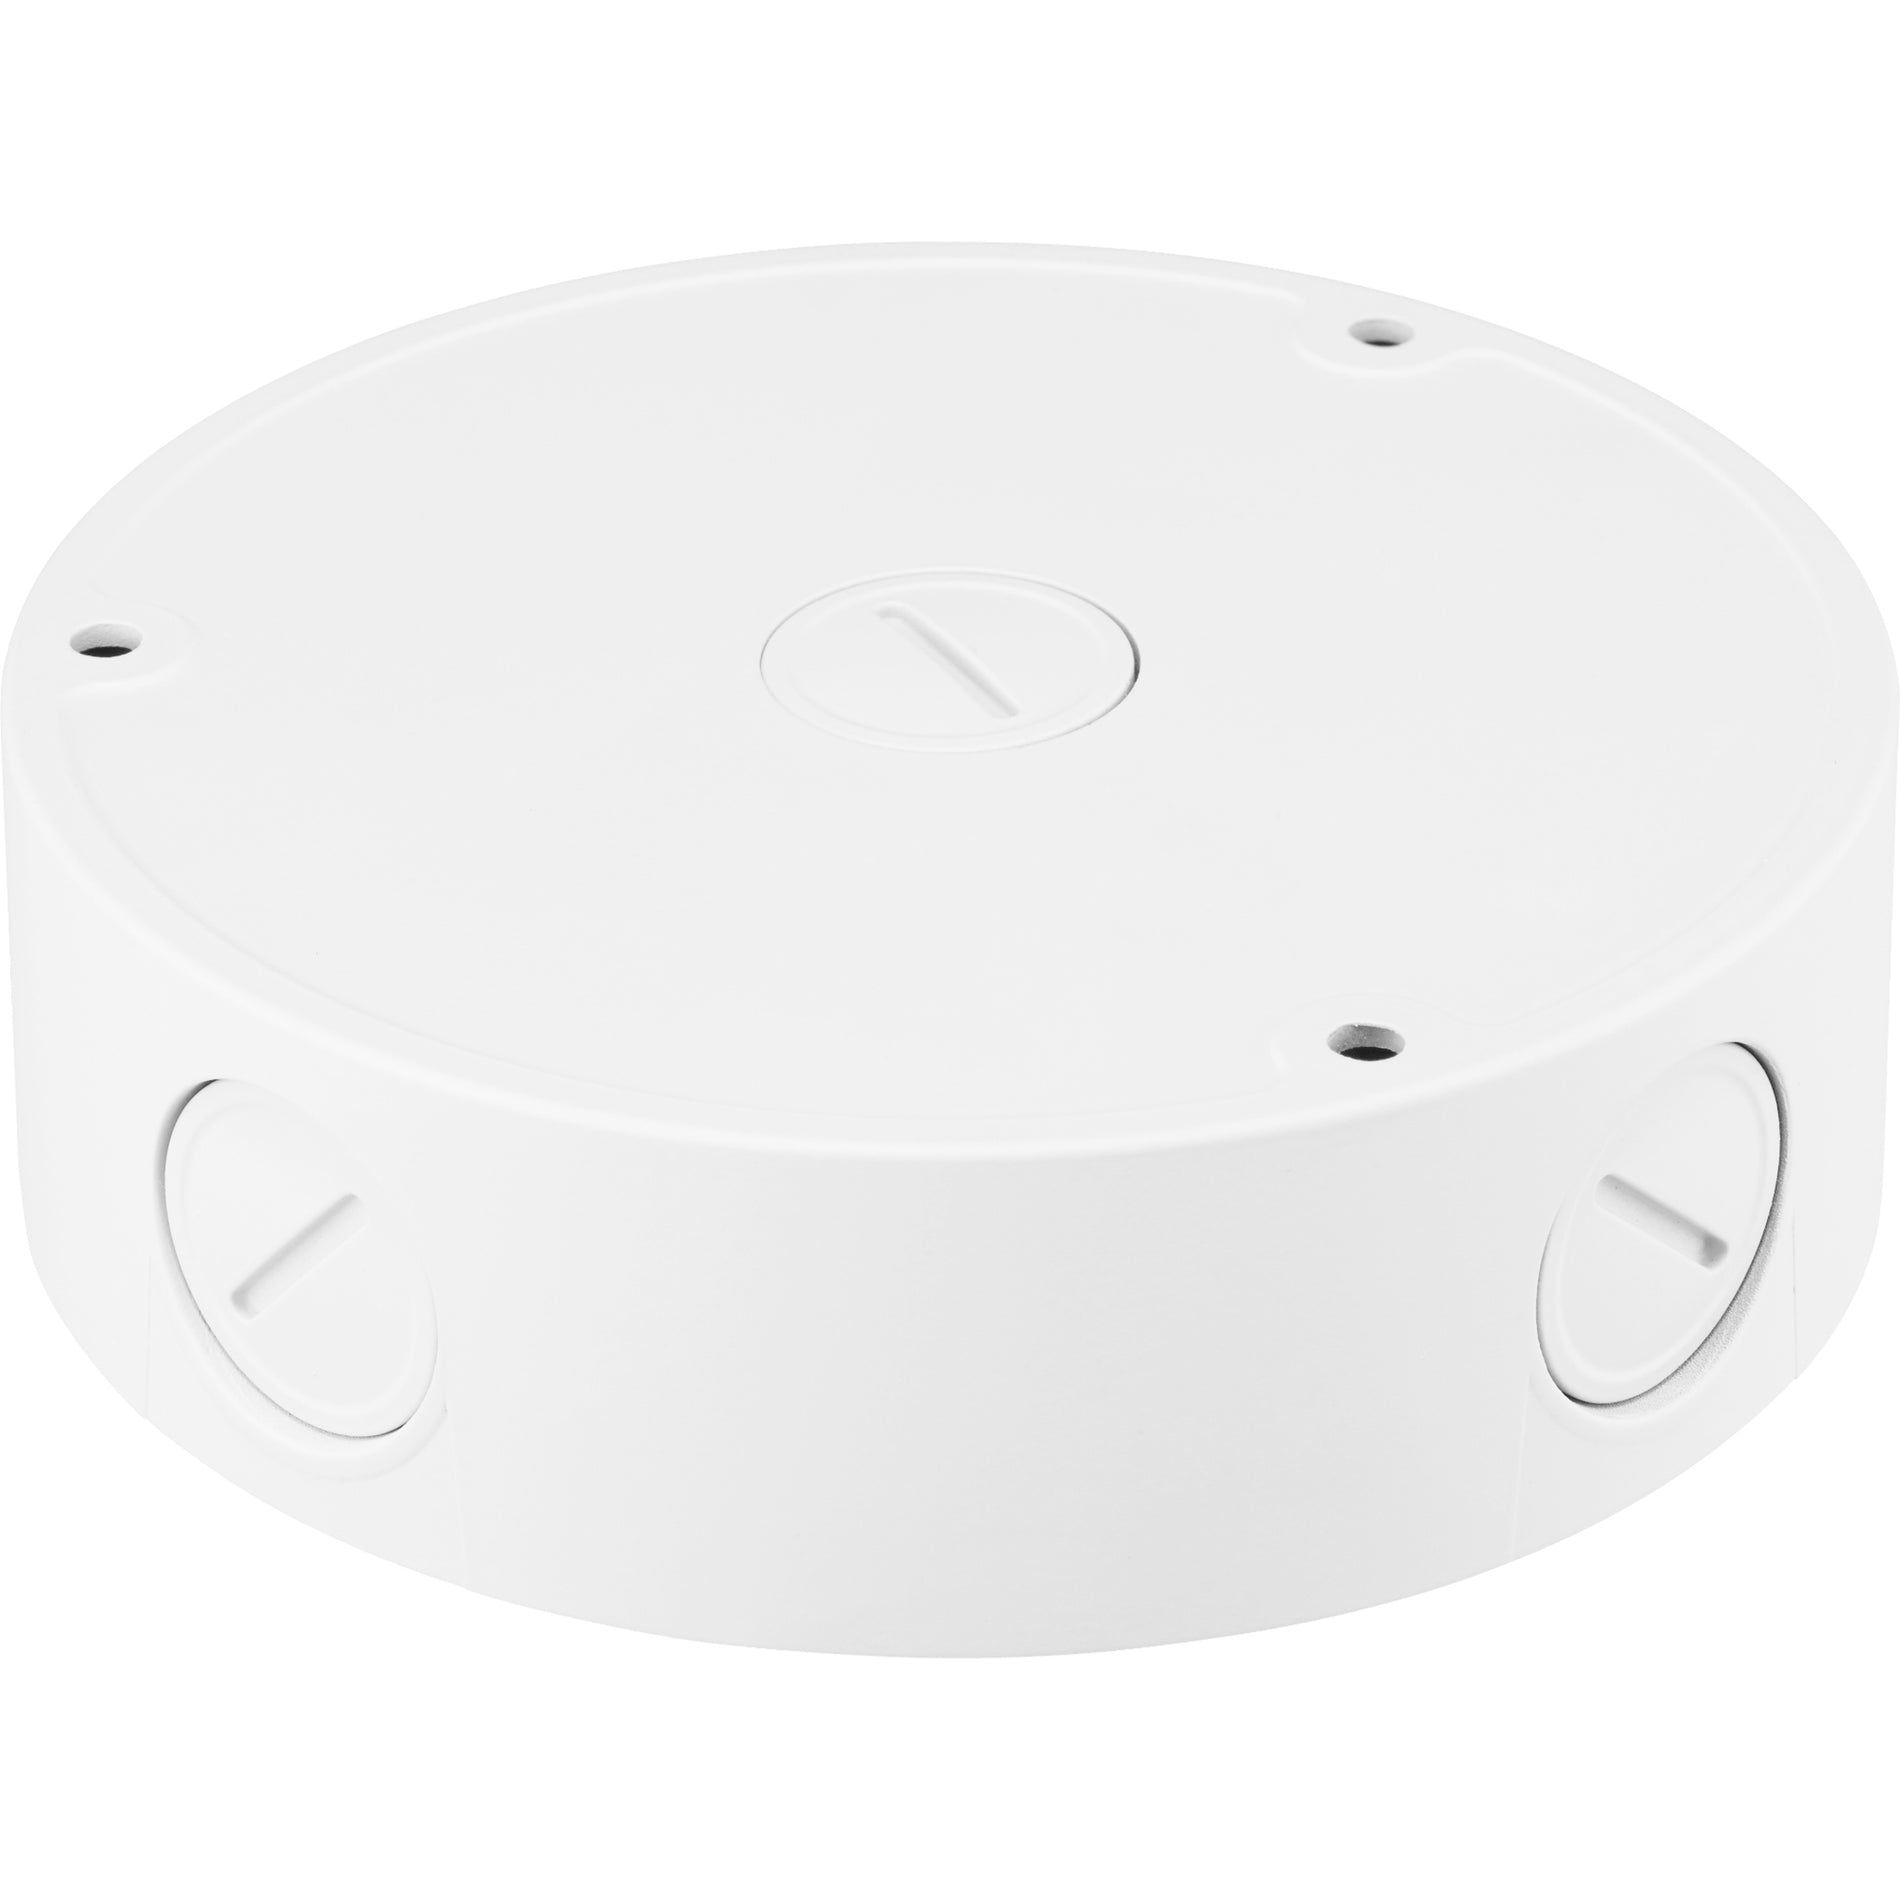 Hanwha Techwin SBV-136BW Waterproof Back Box with Knockouts (White), Mounting Box for Network Camera